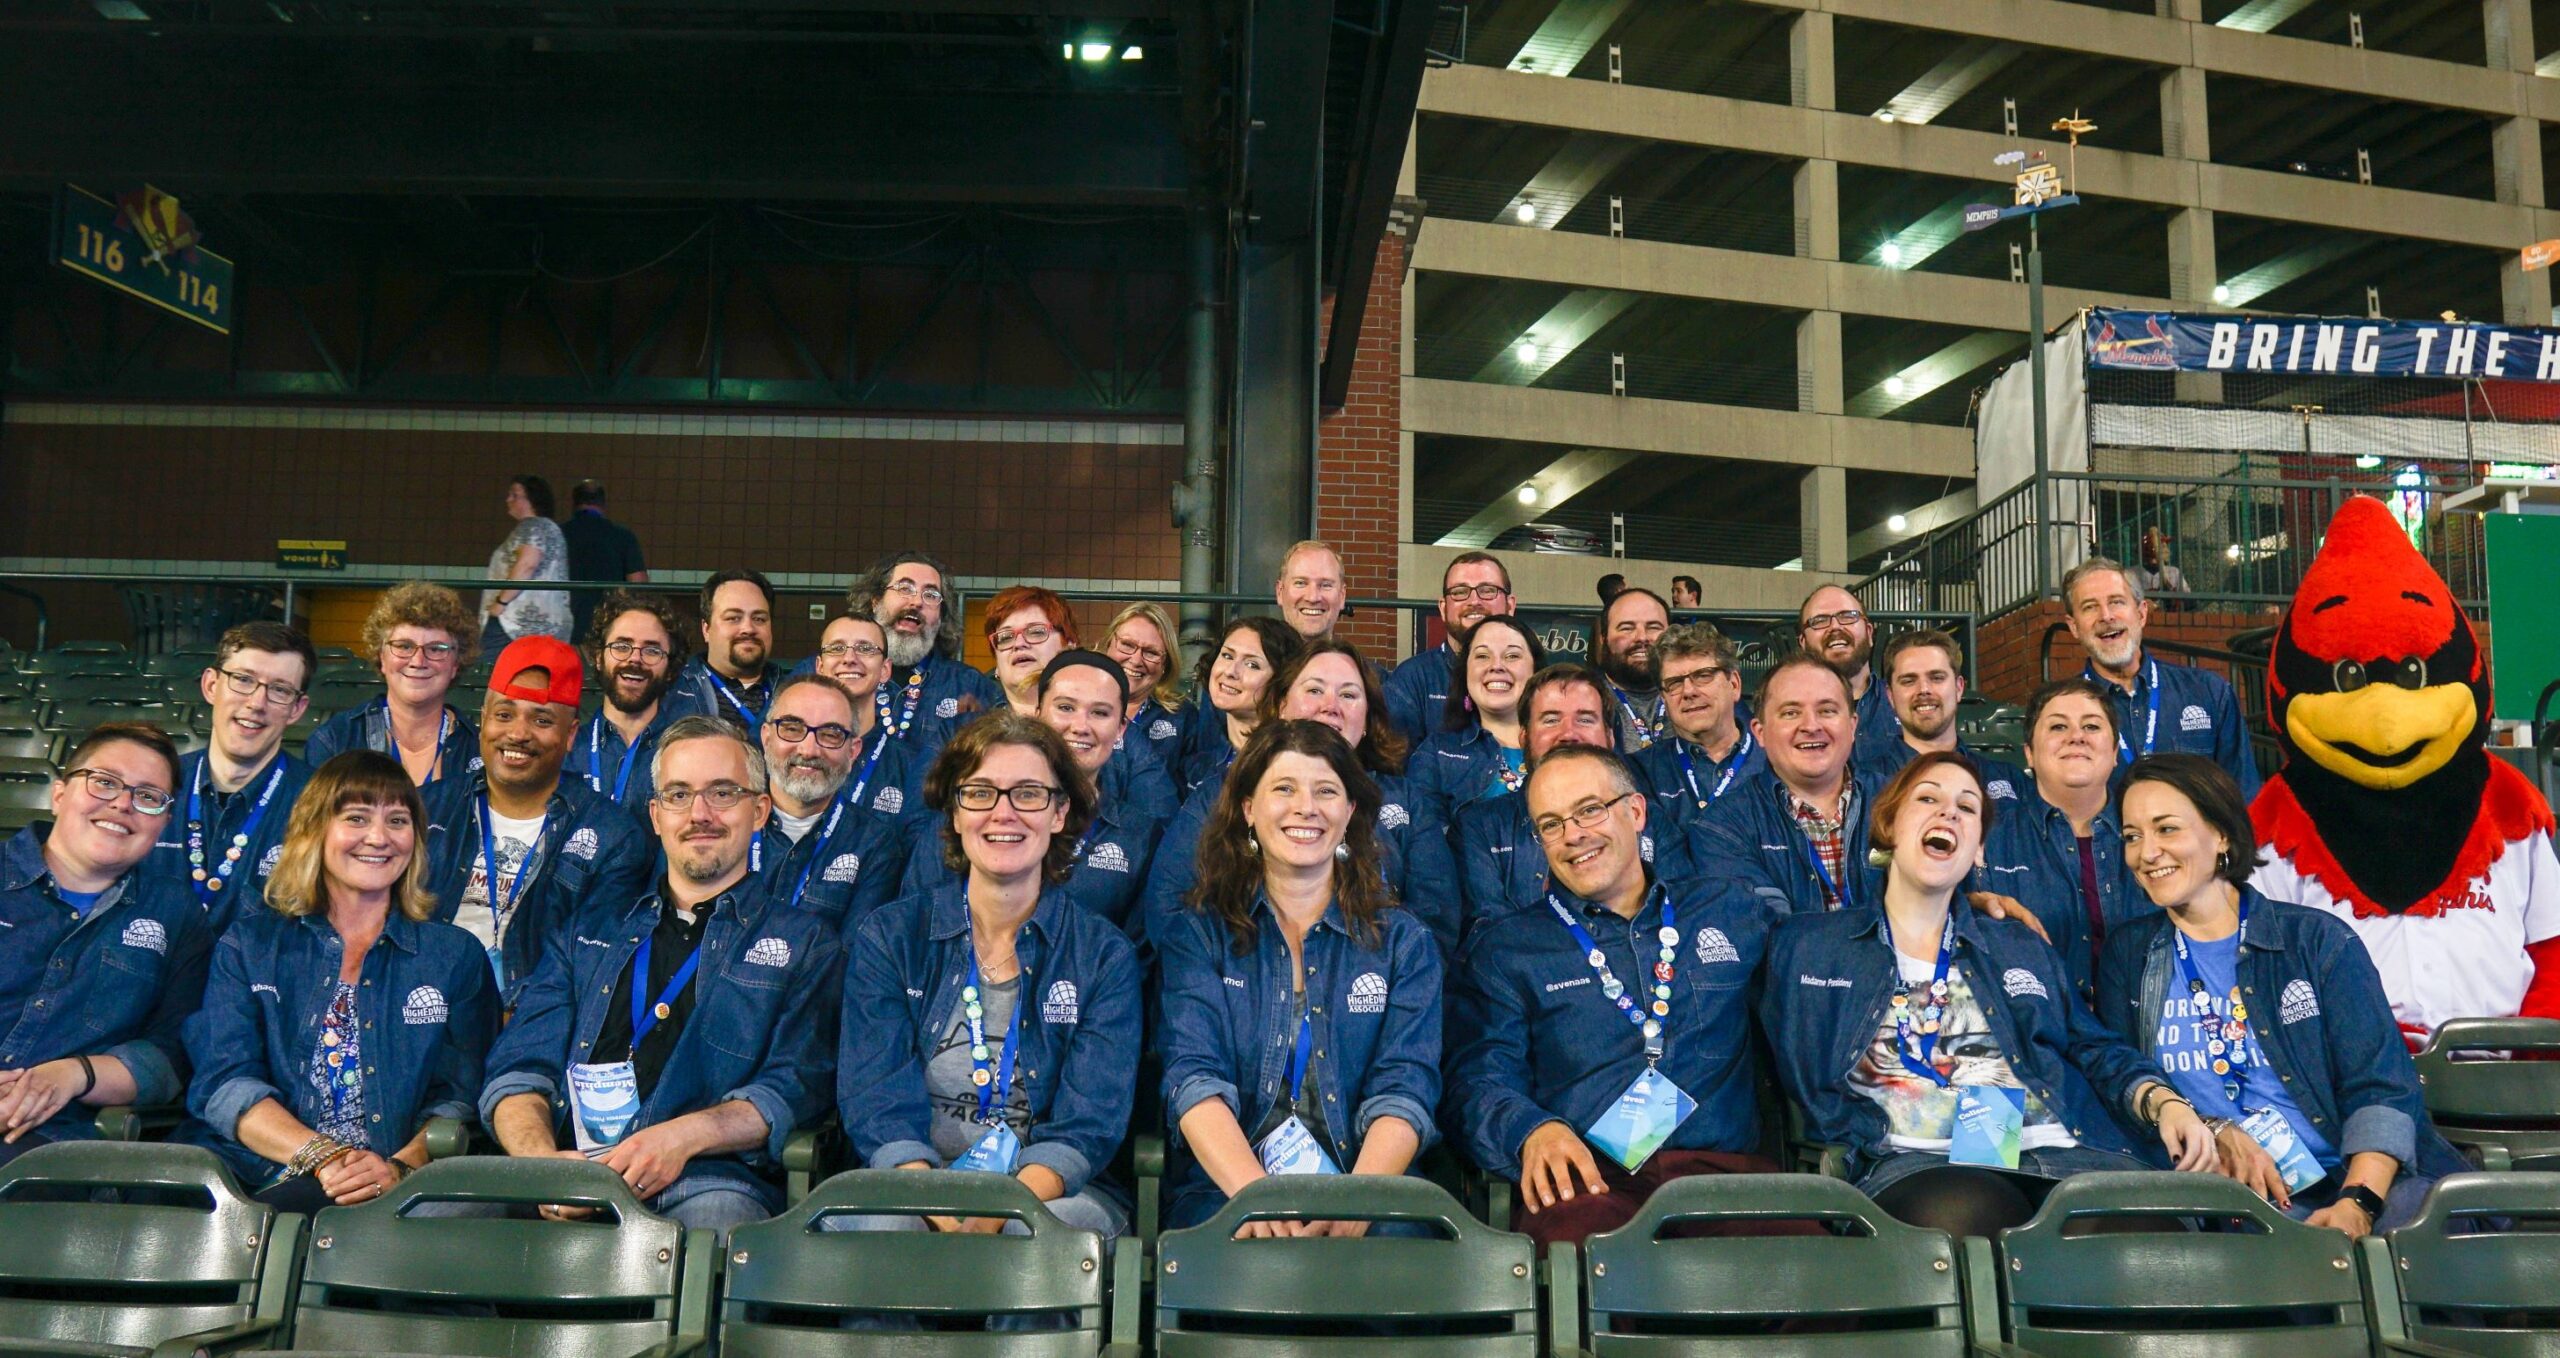 High Ed Web conference committee group photo at stadium with everyone in denim shirts